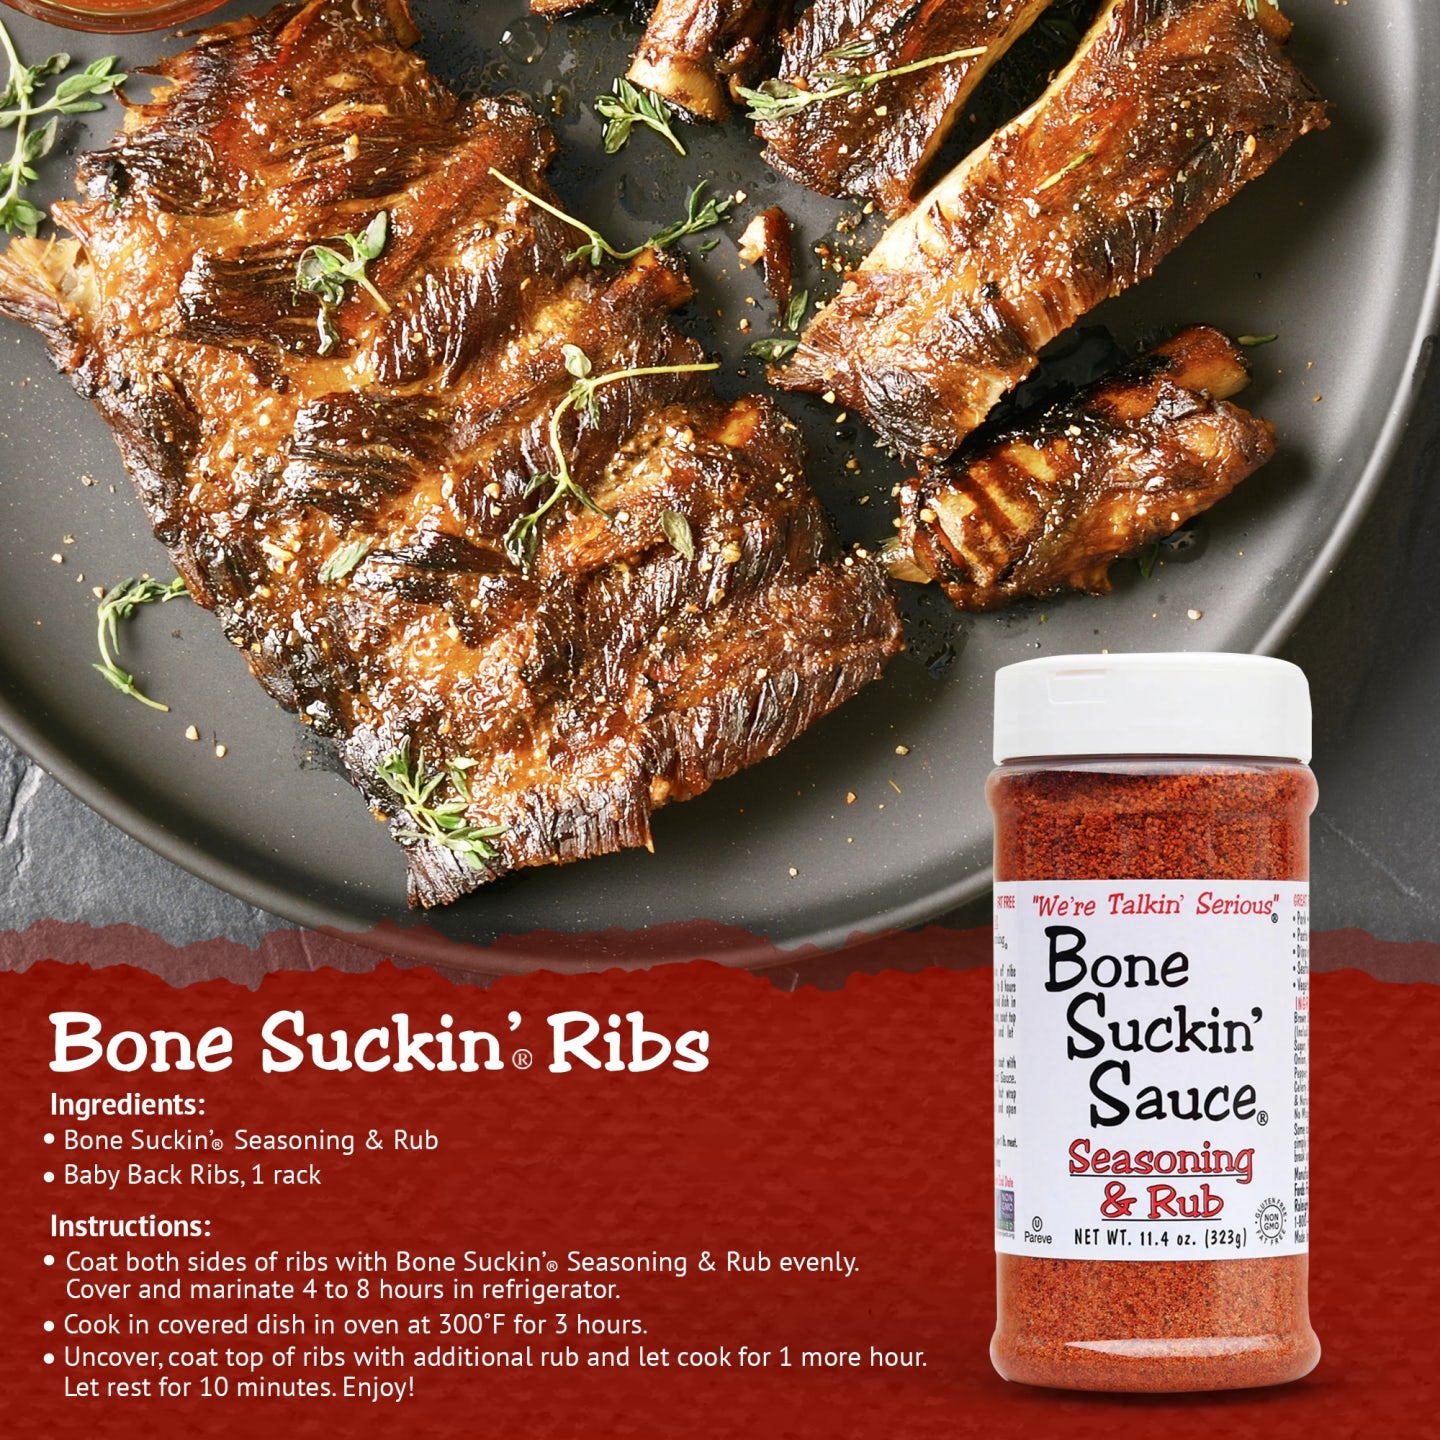 Bone Suckin Ribs Recipe. Ingredients: Bone Suckin Seasoning and rub, baby back ribs, 1 rack. Instructions: Coat both sides of ribs with Bone Suckin Seasoning & Rub evenly. Cover and marinate 4-8 hours in refrigerator. Cook in covered dish in oven at 300 F for 3 hours. Uncover, coat top of ribs with additional rub and let cook for 1 more hour. Let rest for 10 minutes. Enjoy!